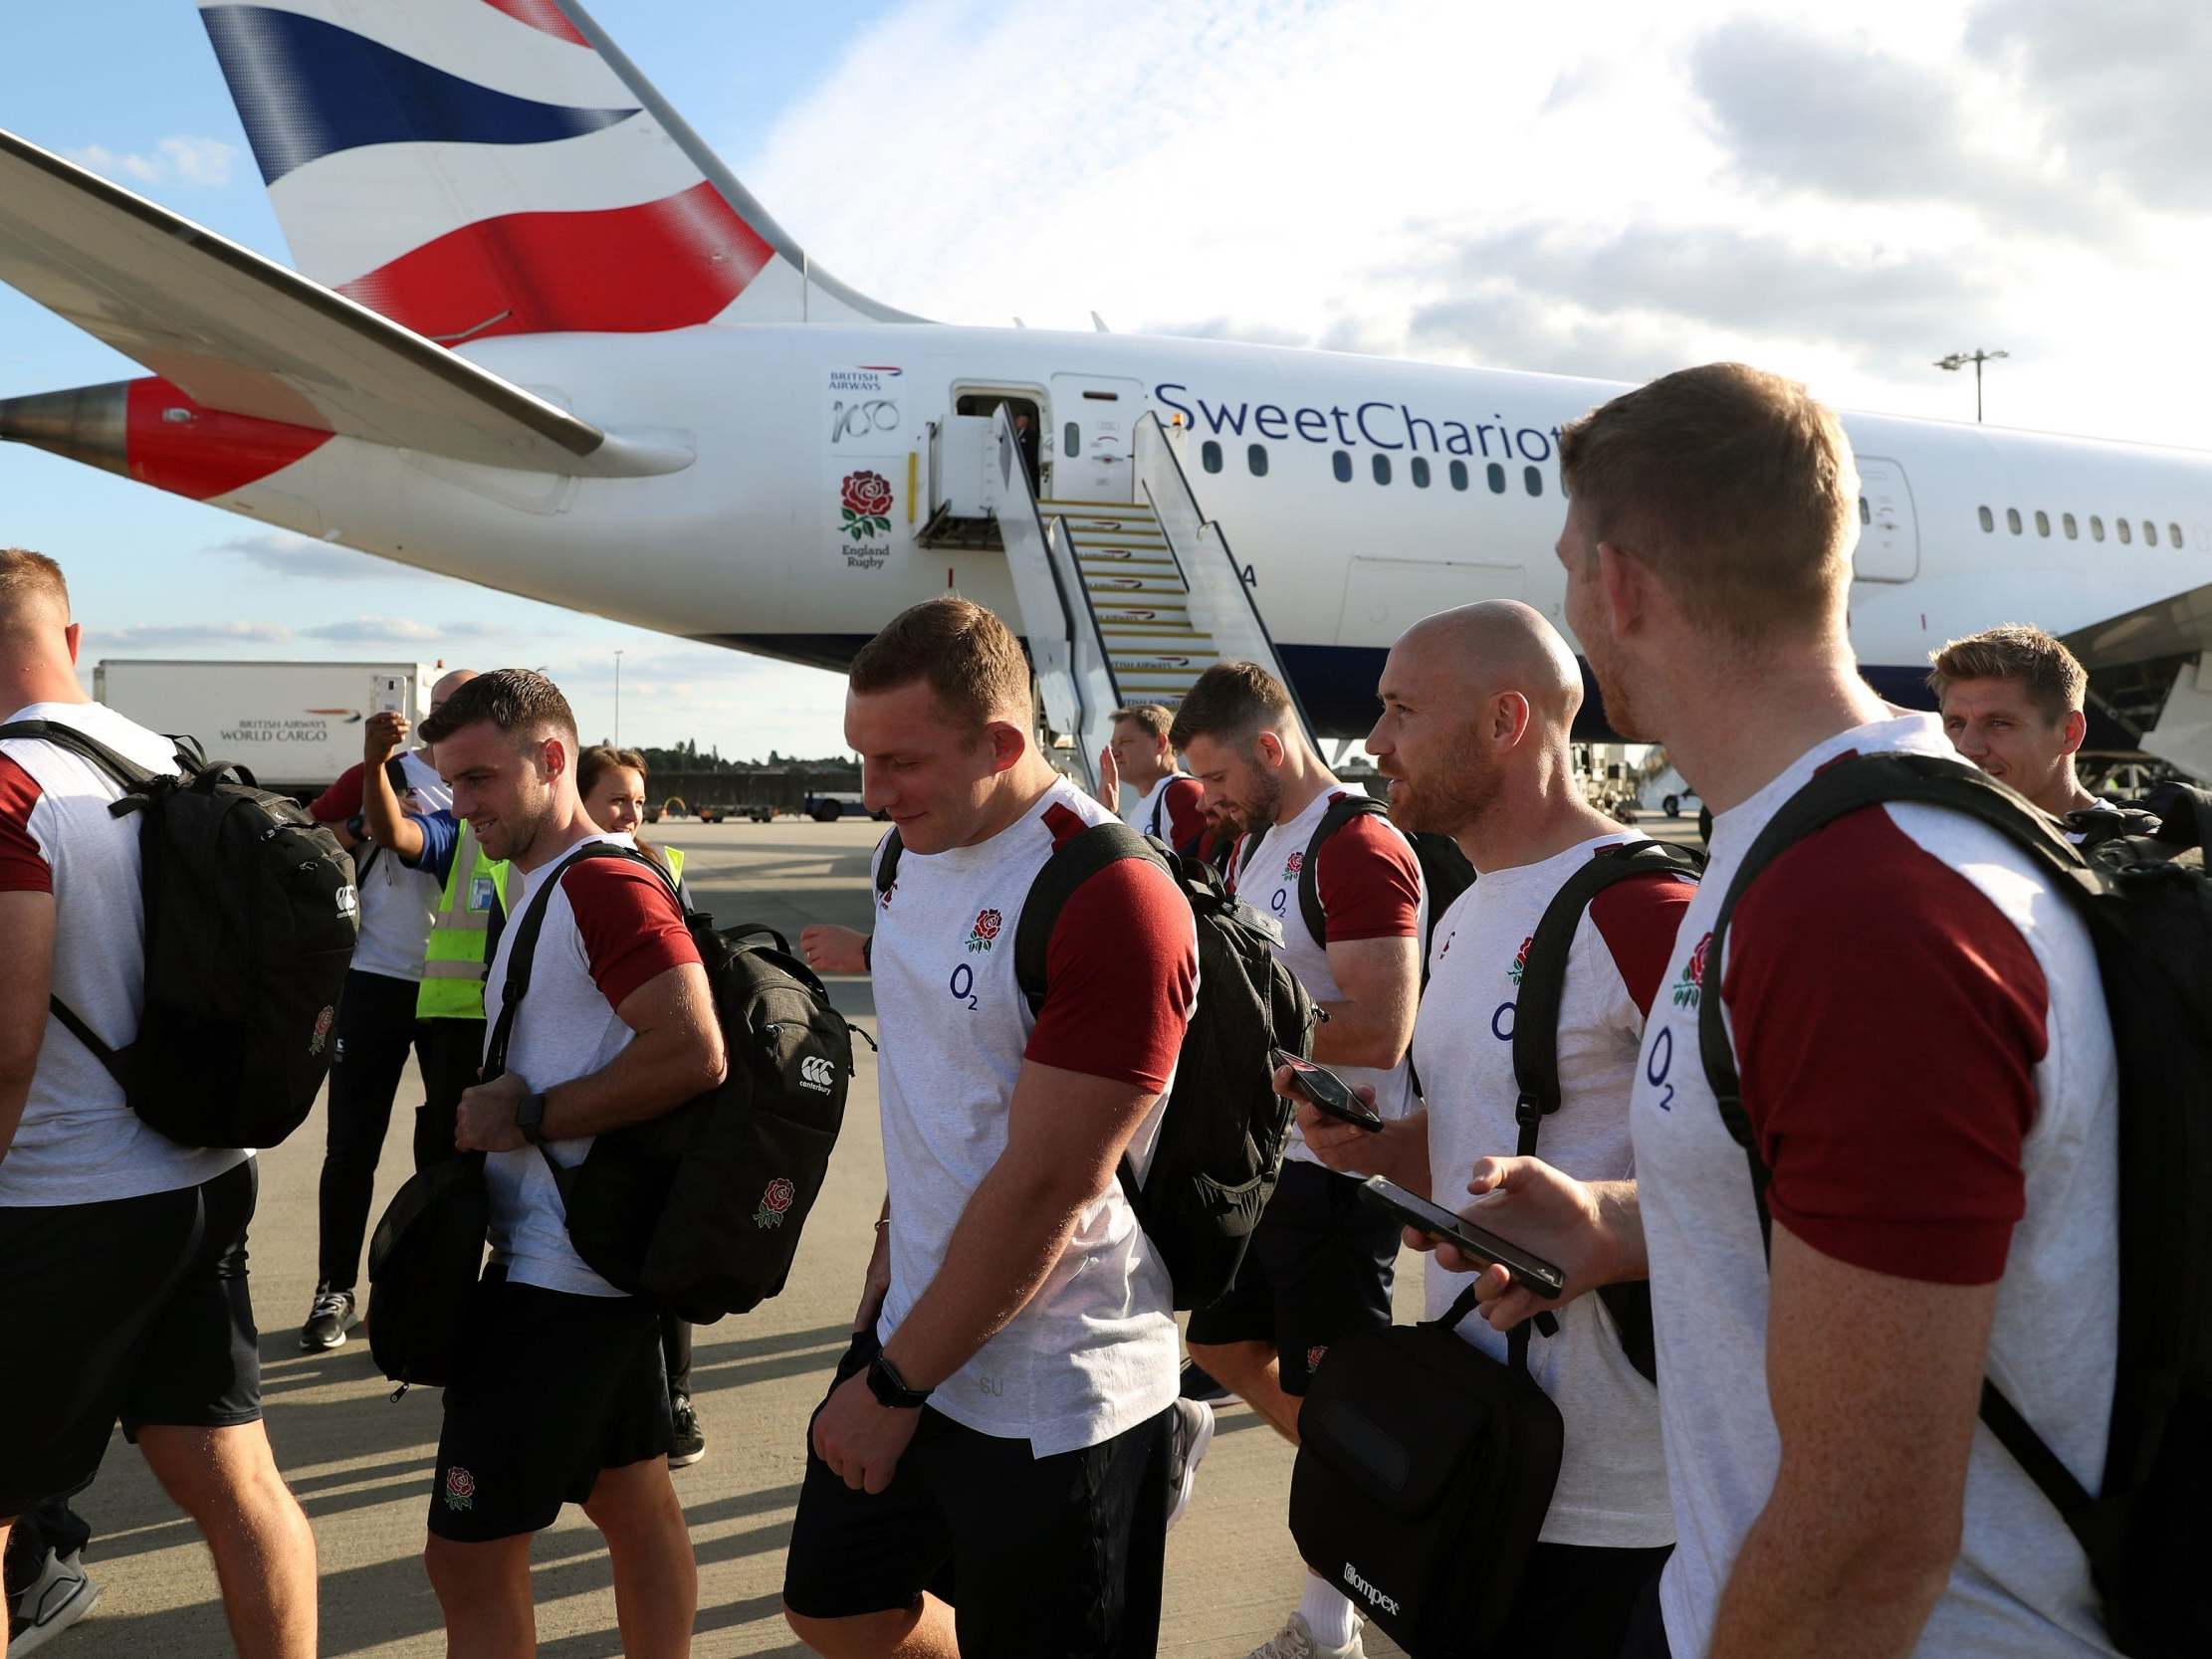 England's rugby team was left stranded at Tokyo Narita International following Typhoon Faxai